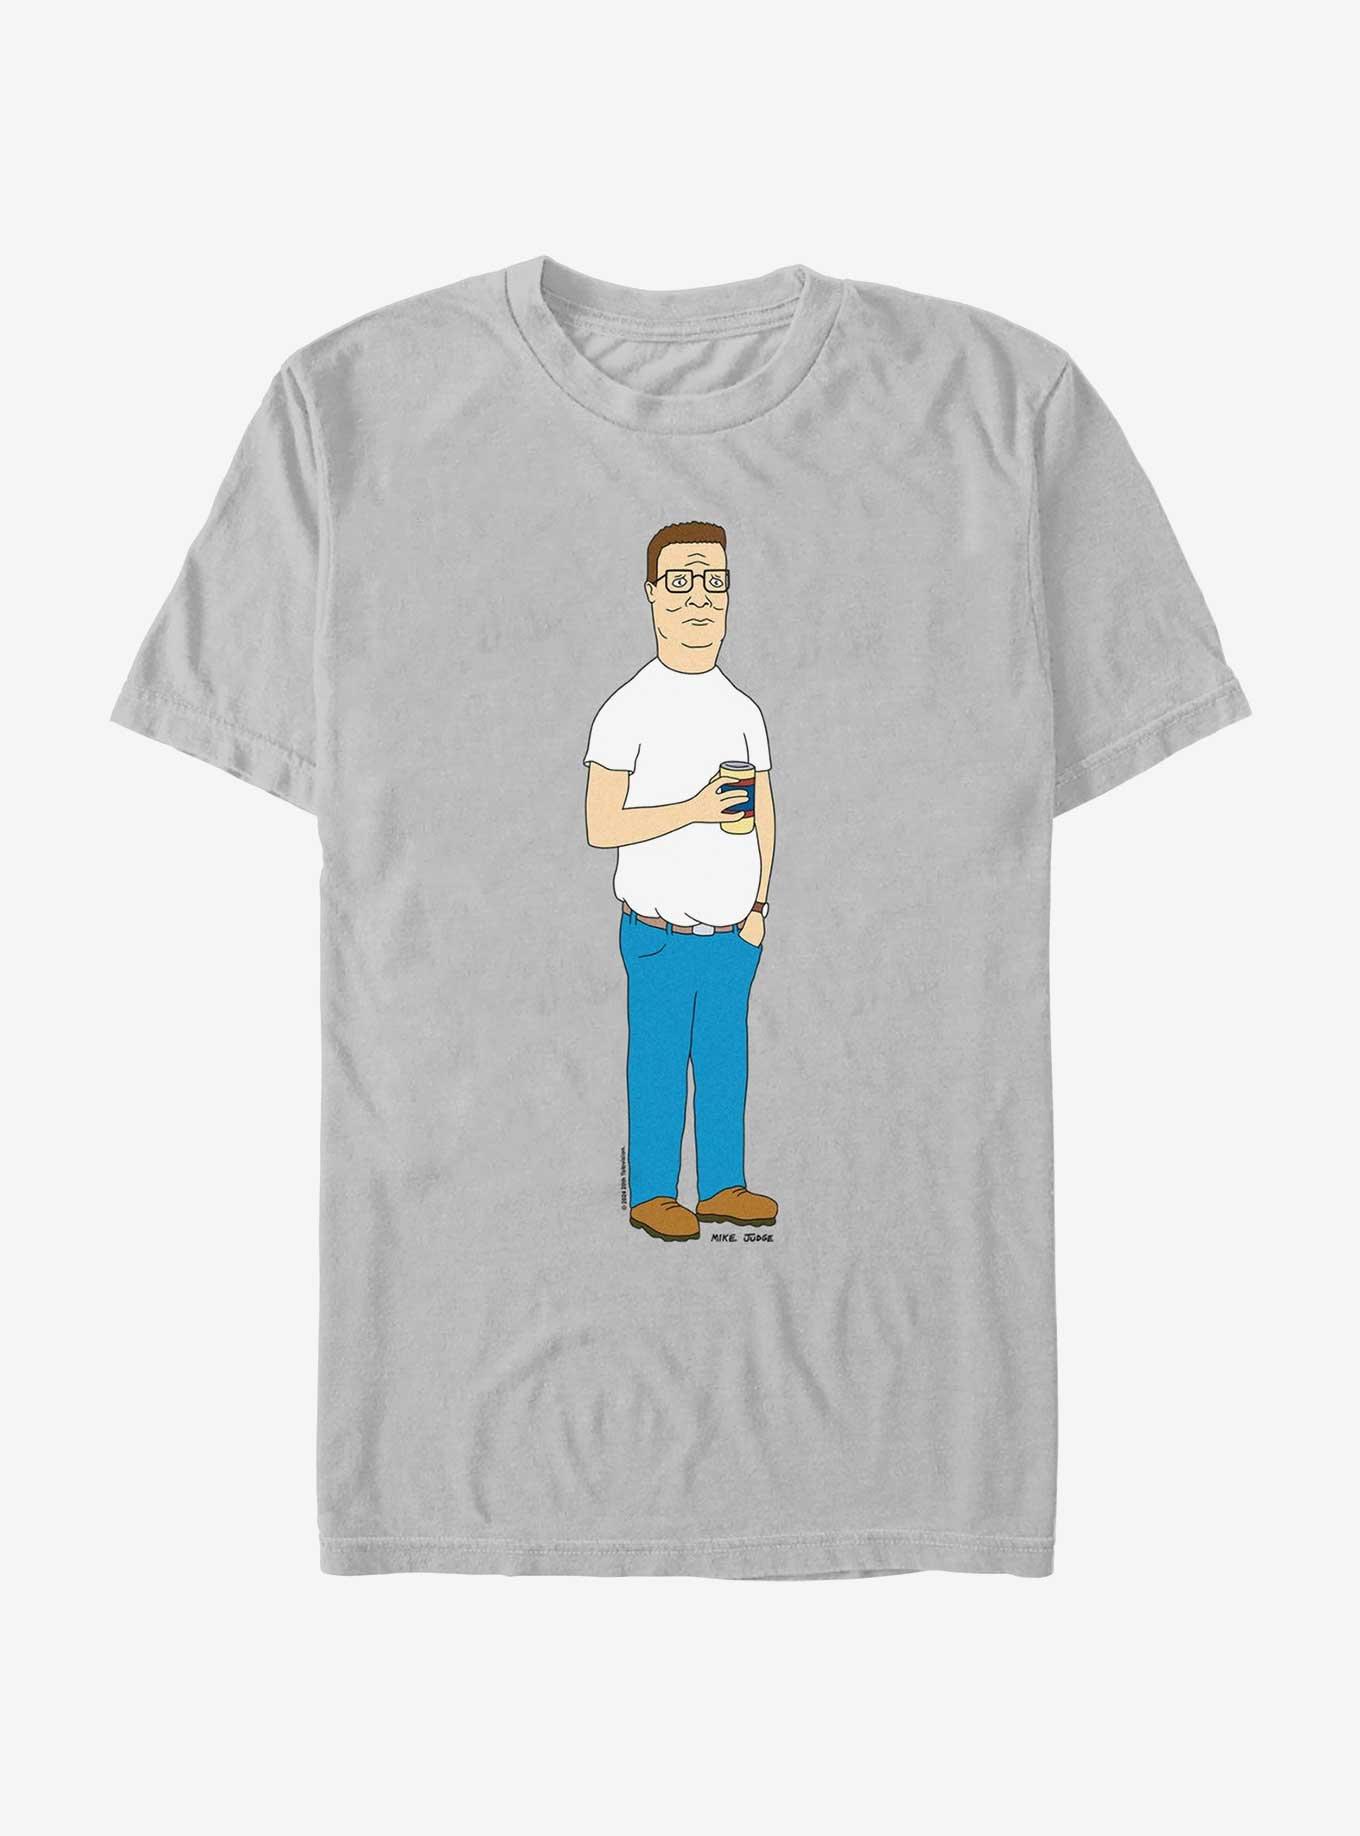 King of the Hill Hank T-Shirt, SILVER, hi-res